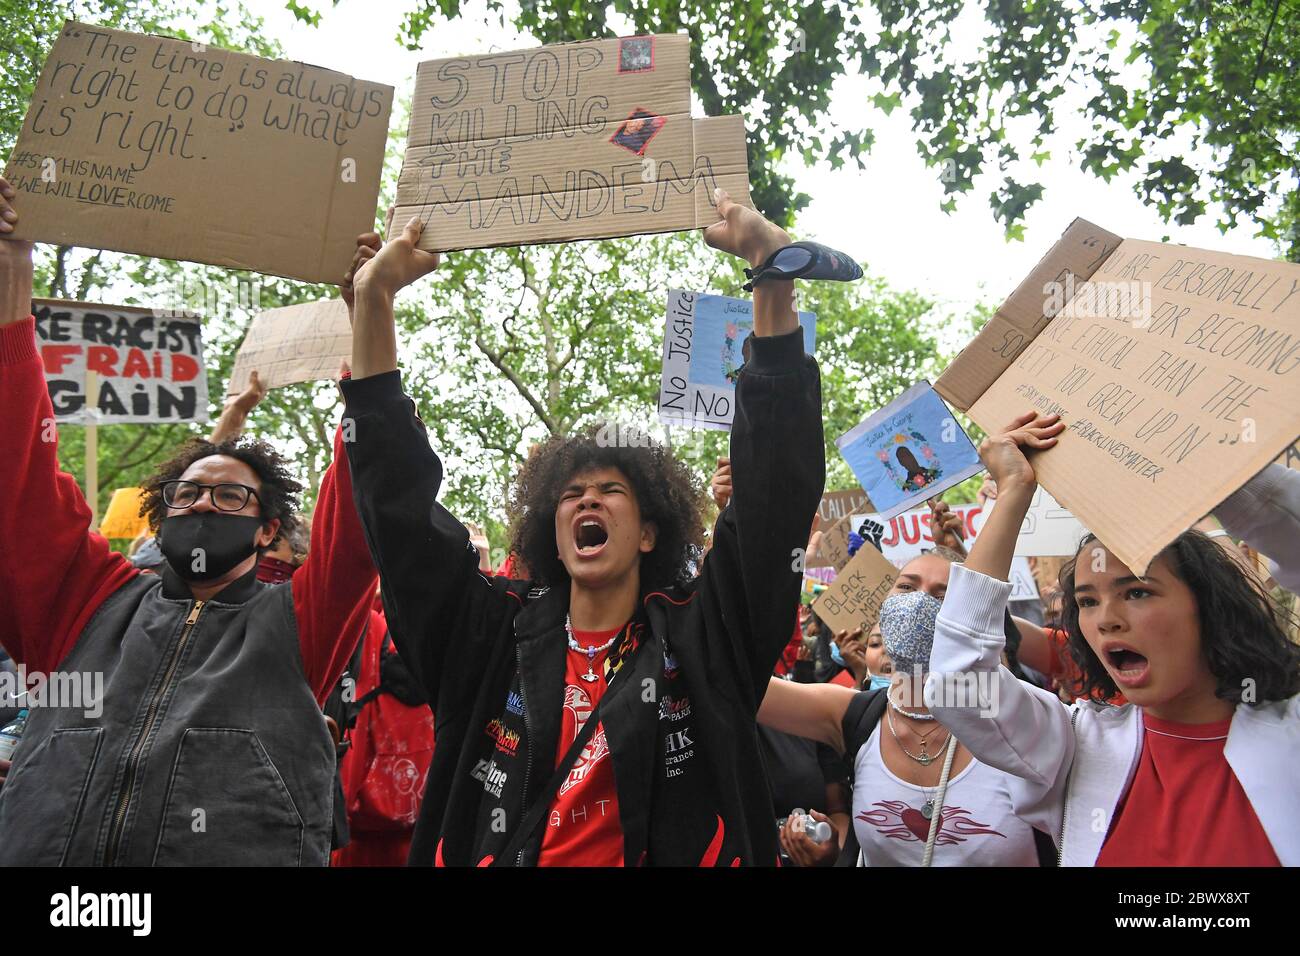 People participate in a Black Lives Matter protest rally in central London in memory of George Floyd who was killed on May 25 while in police custody in the US city of Minneapolis. Stock Photo